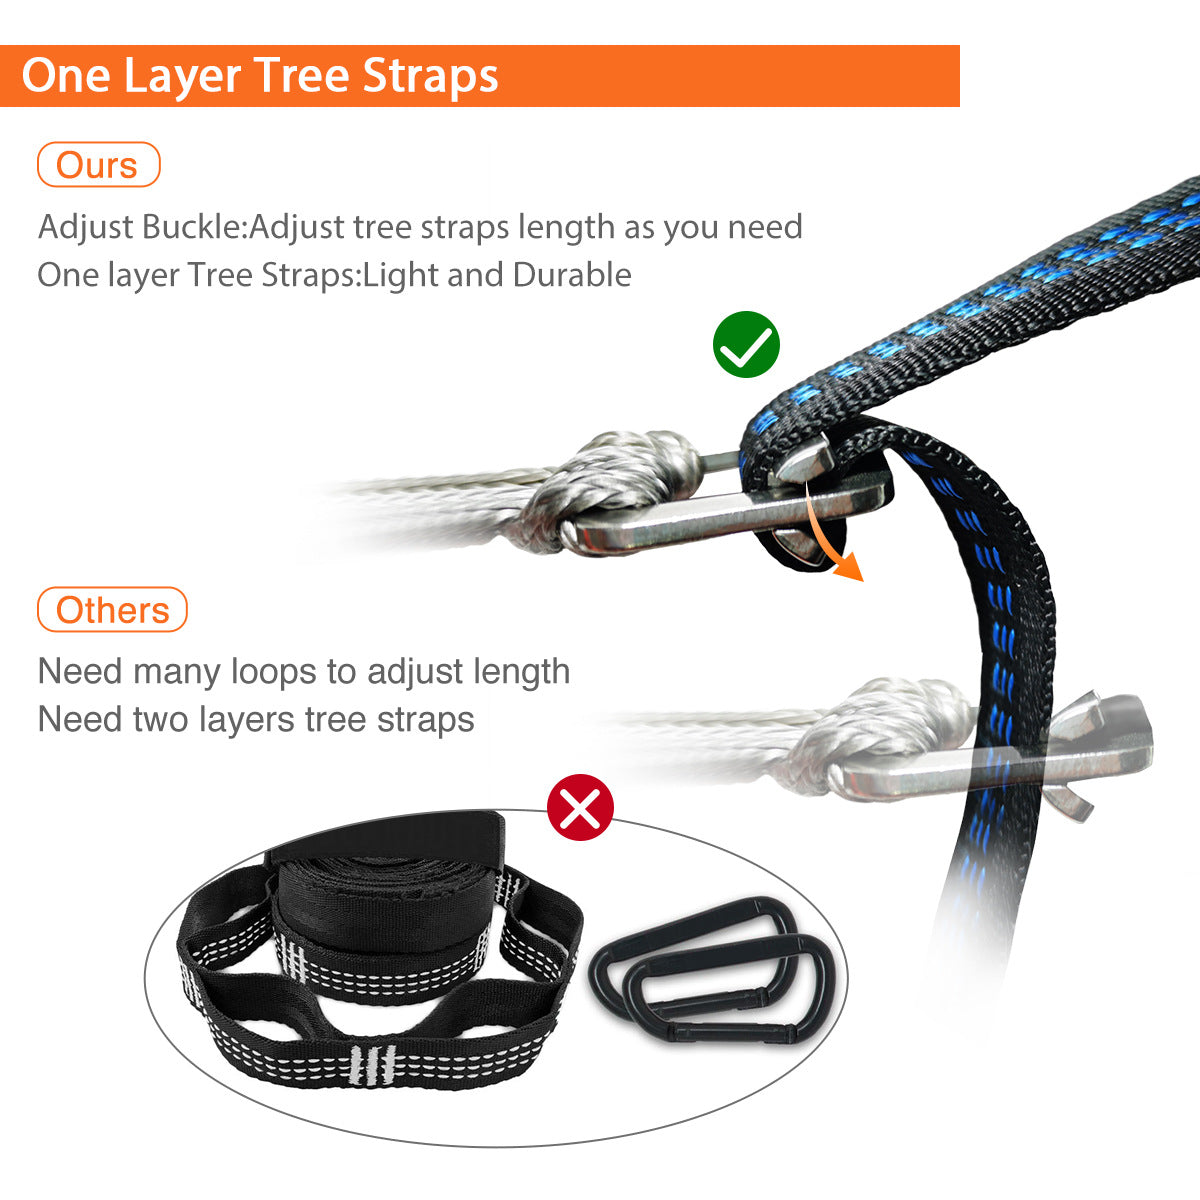 Adjustable Tree Straps | Onewind Outdoors